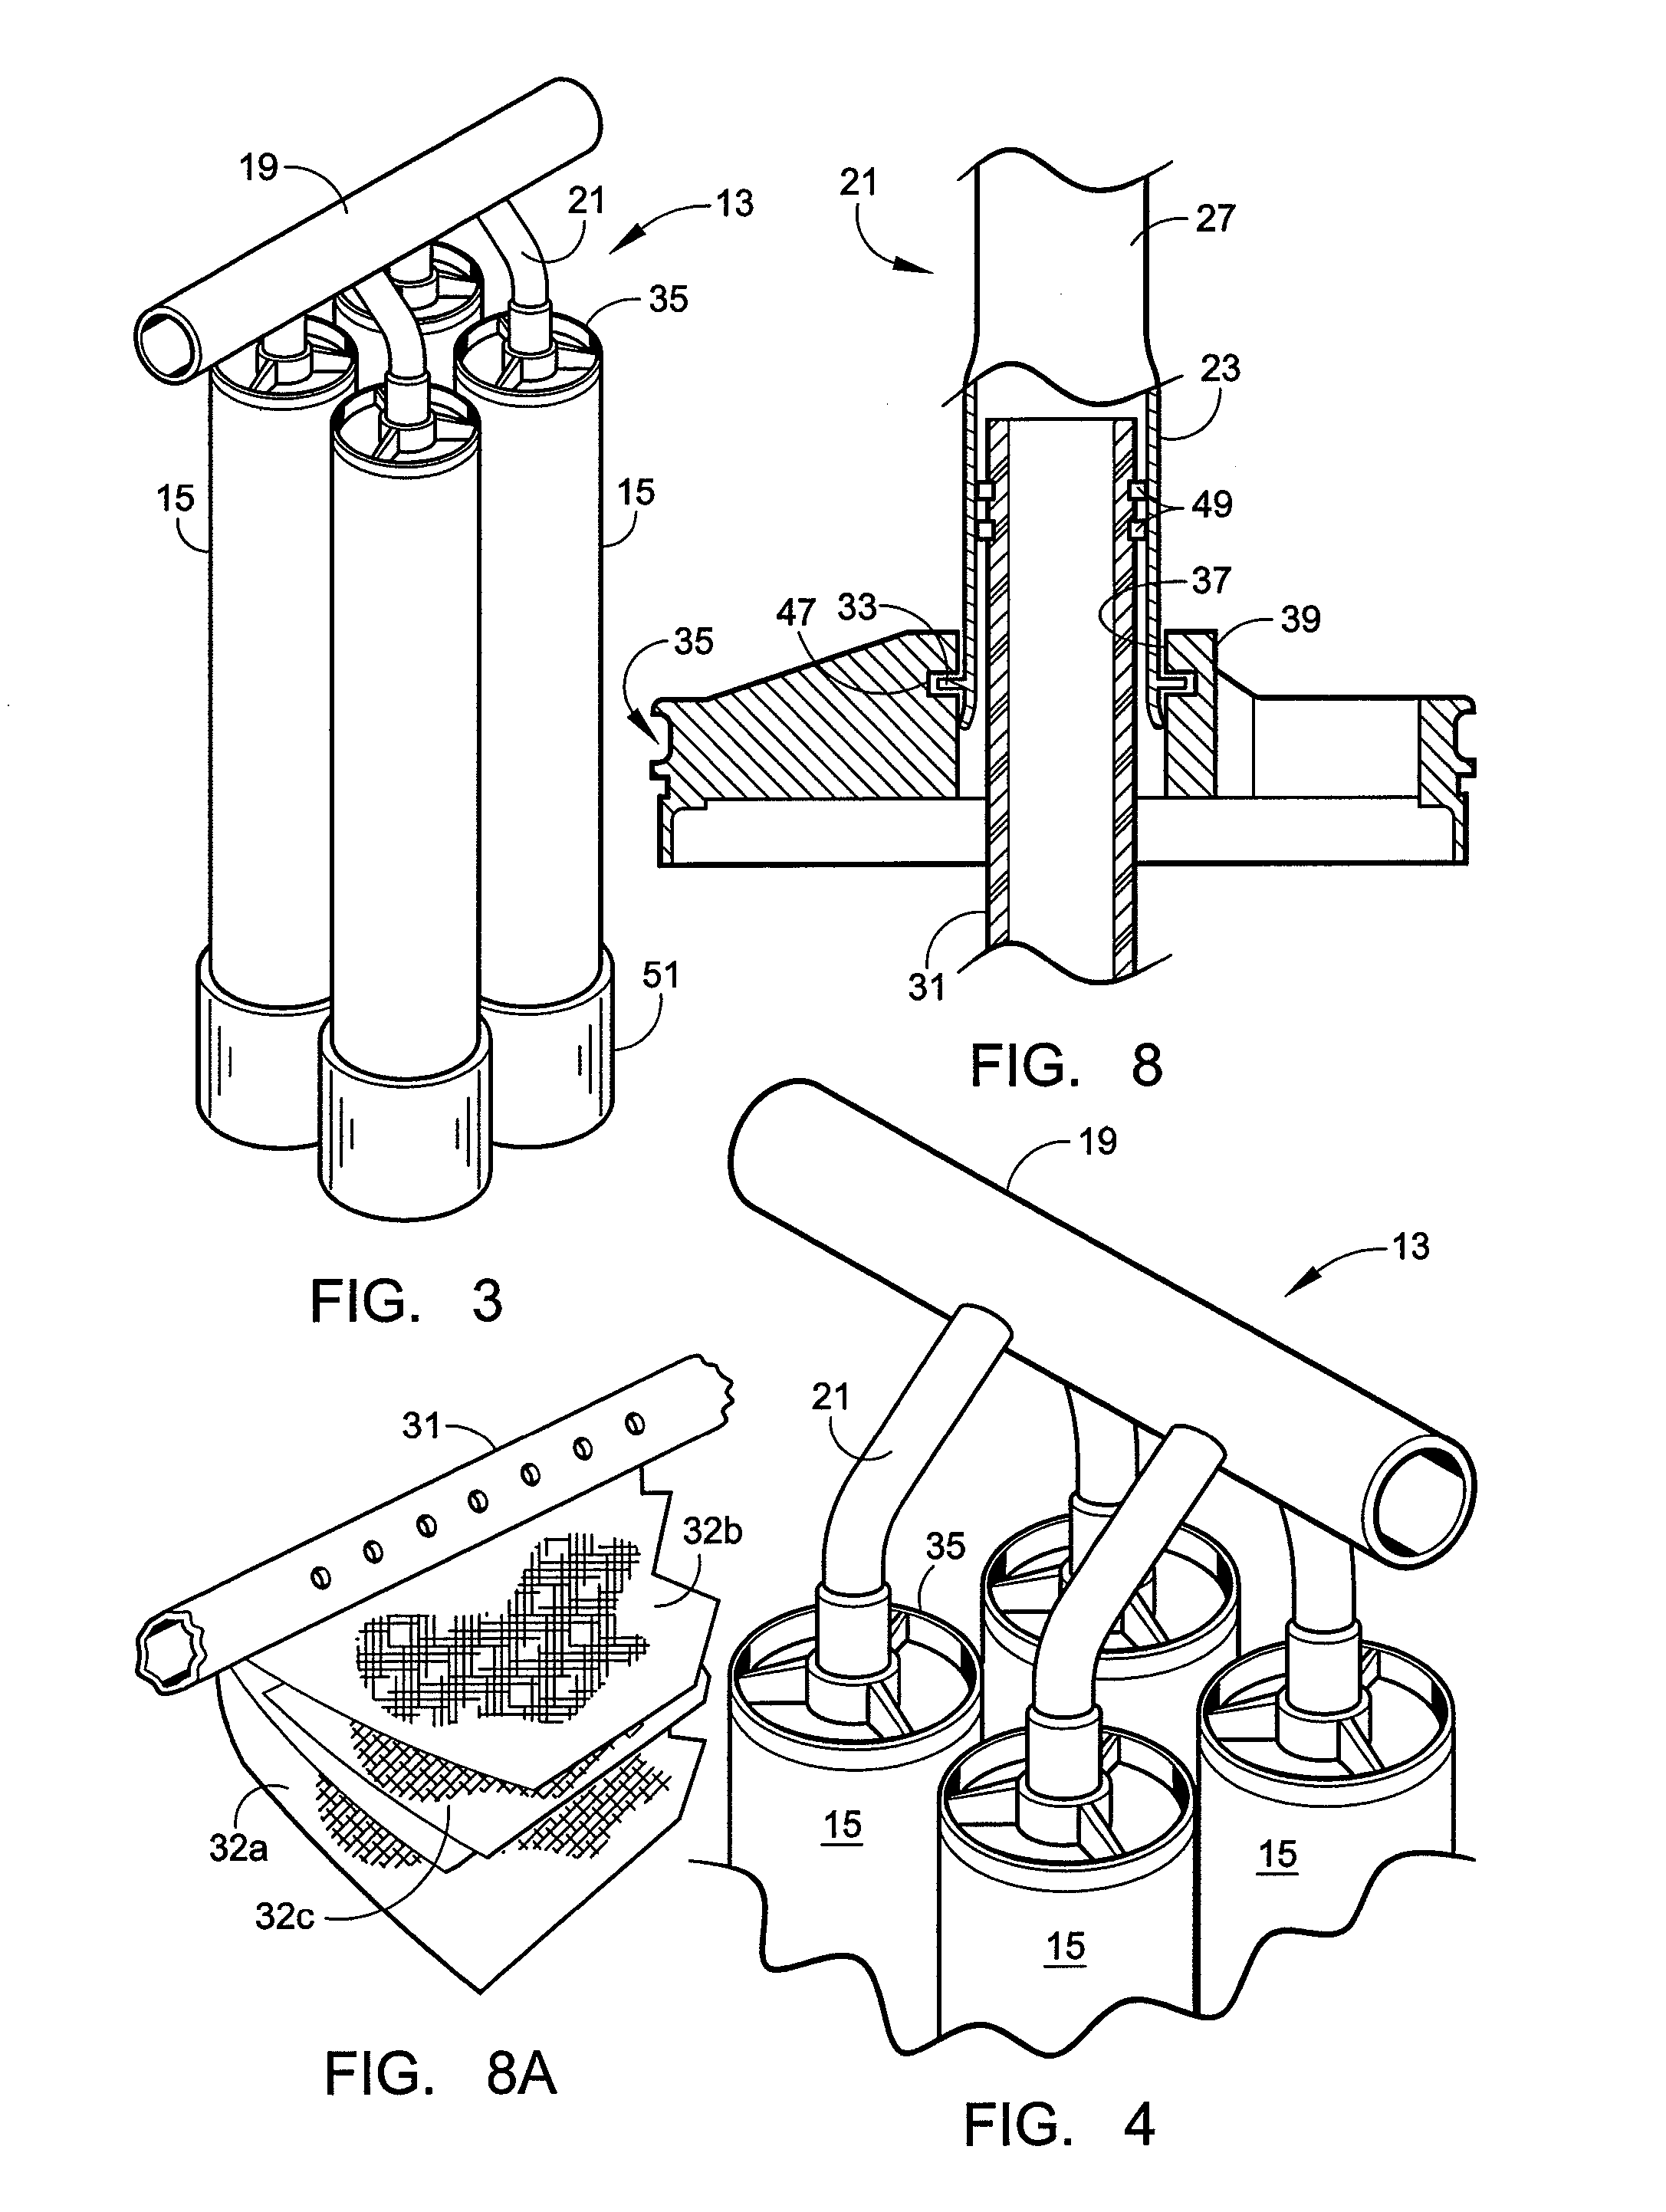 Network for supporting spiral wound membrane cartridges for submerged operation